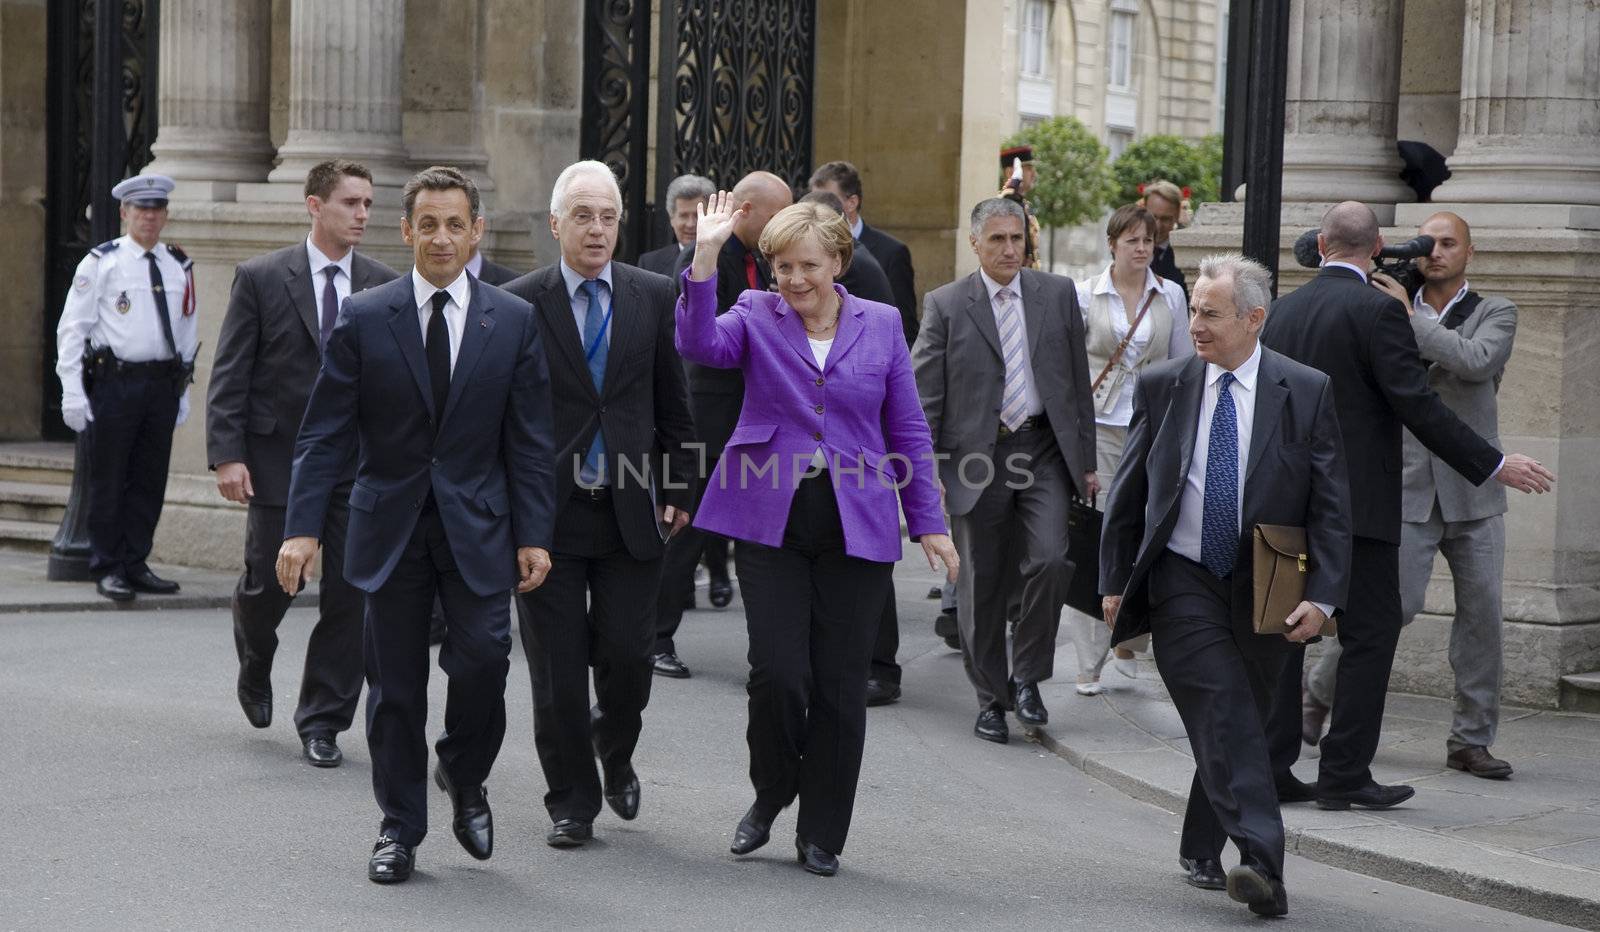 PARIS, FRANCE - JUNE 11 - 2009: French president Nicolas Sarkozy and German chancellor Angela Merkel outside the Elysee Palace on their way to lunch.